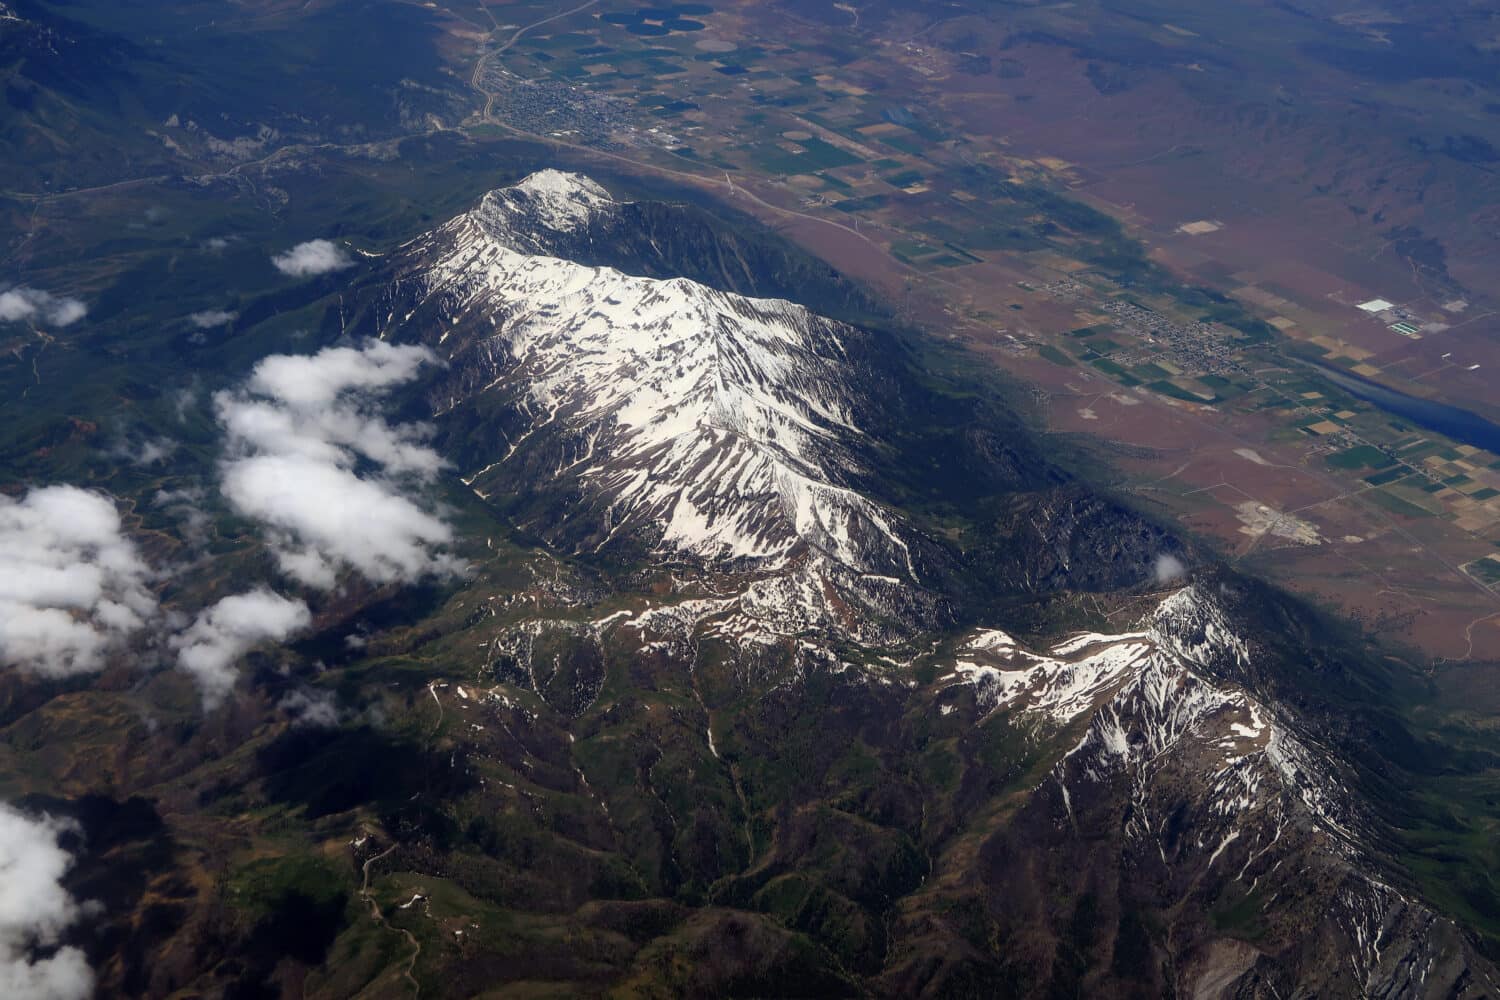 Aerial view of Mount Nebo, Utah with the towns of Nephi and Mona in the background.